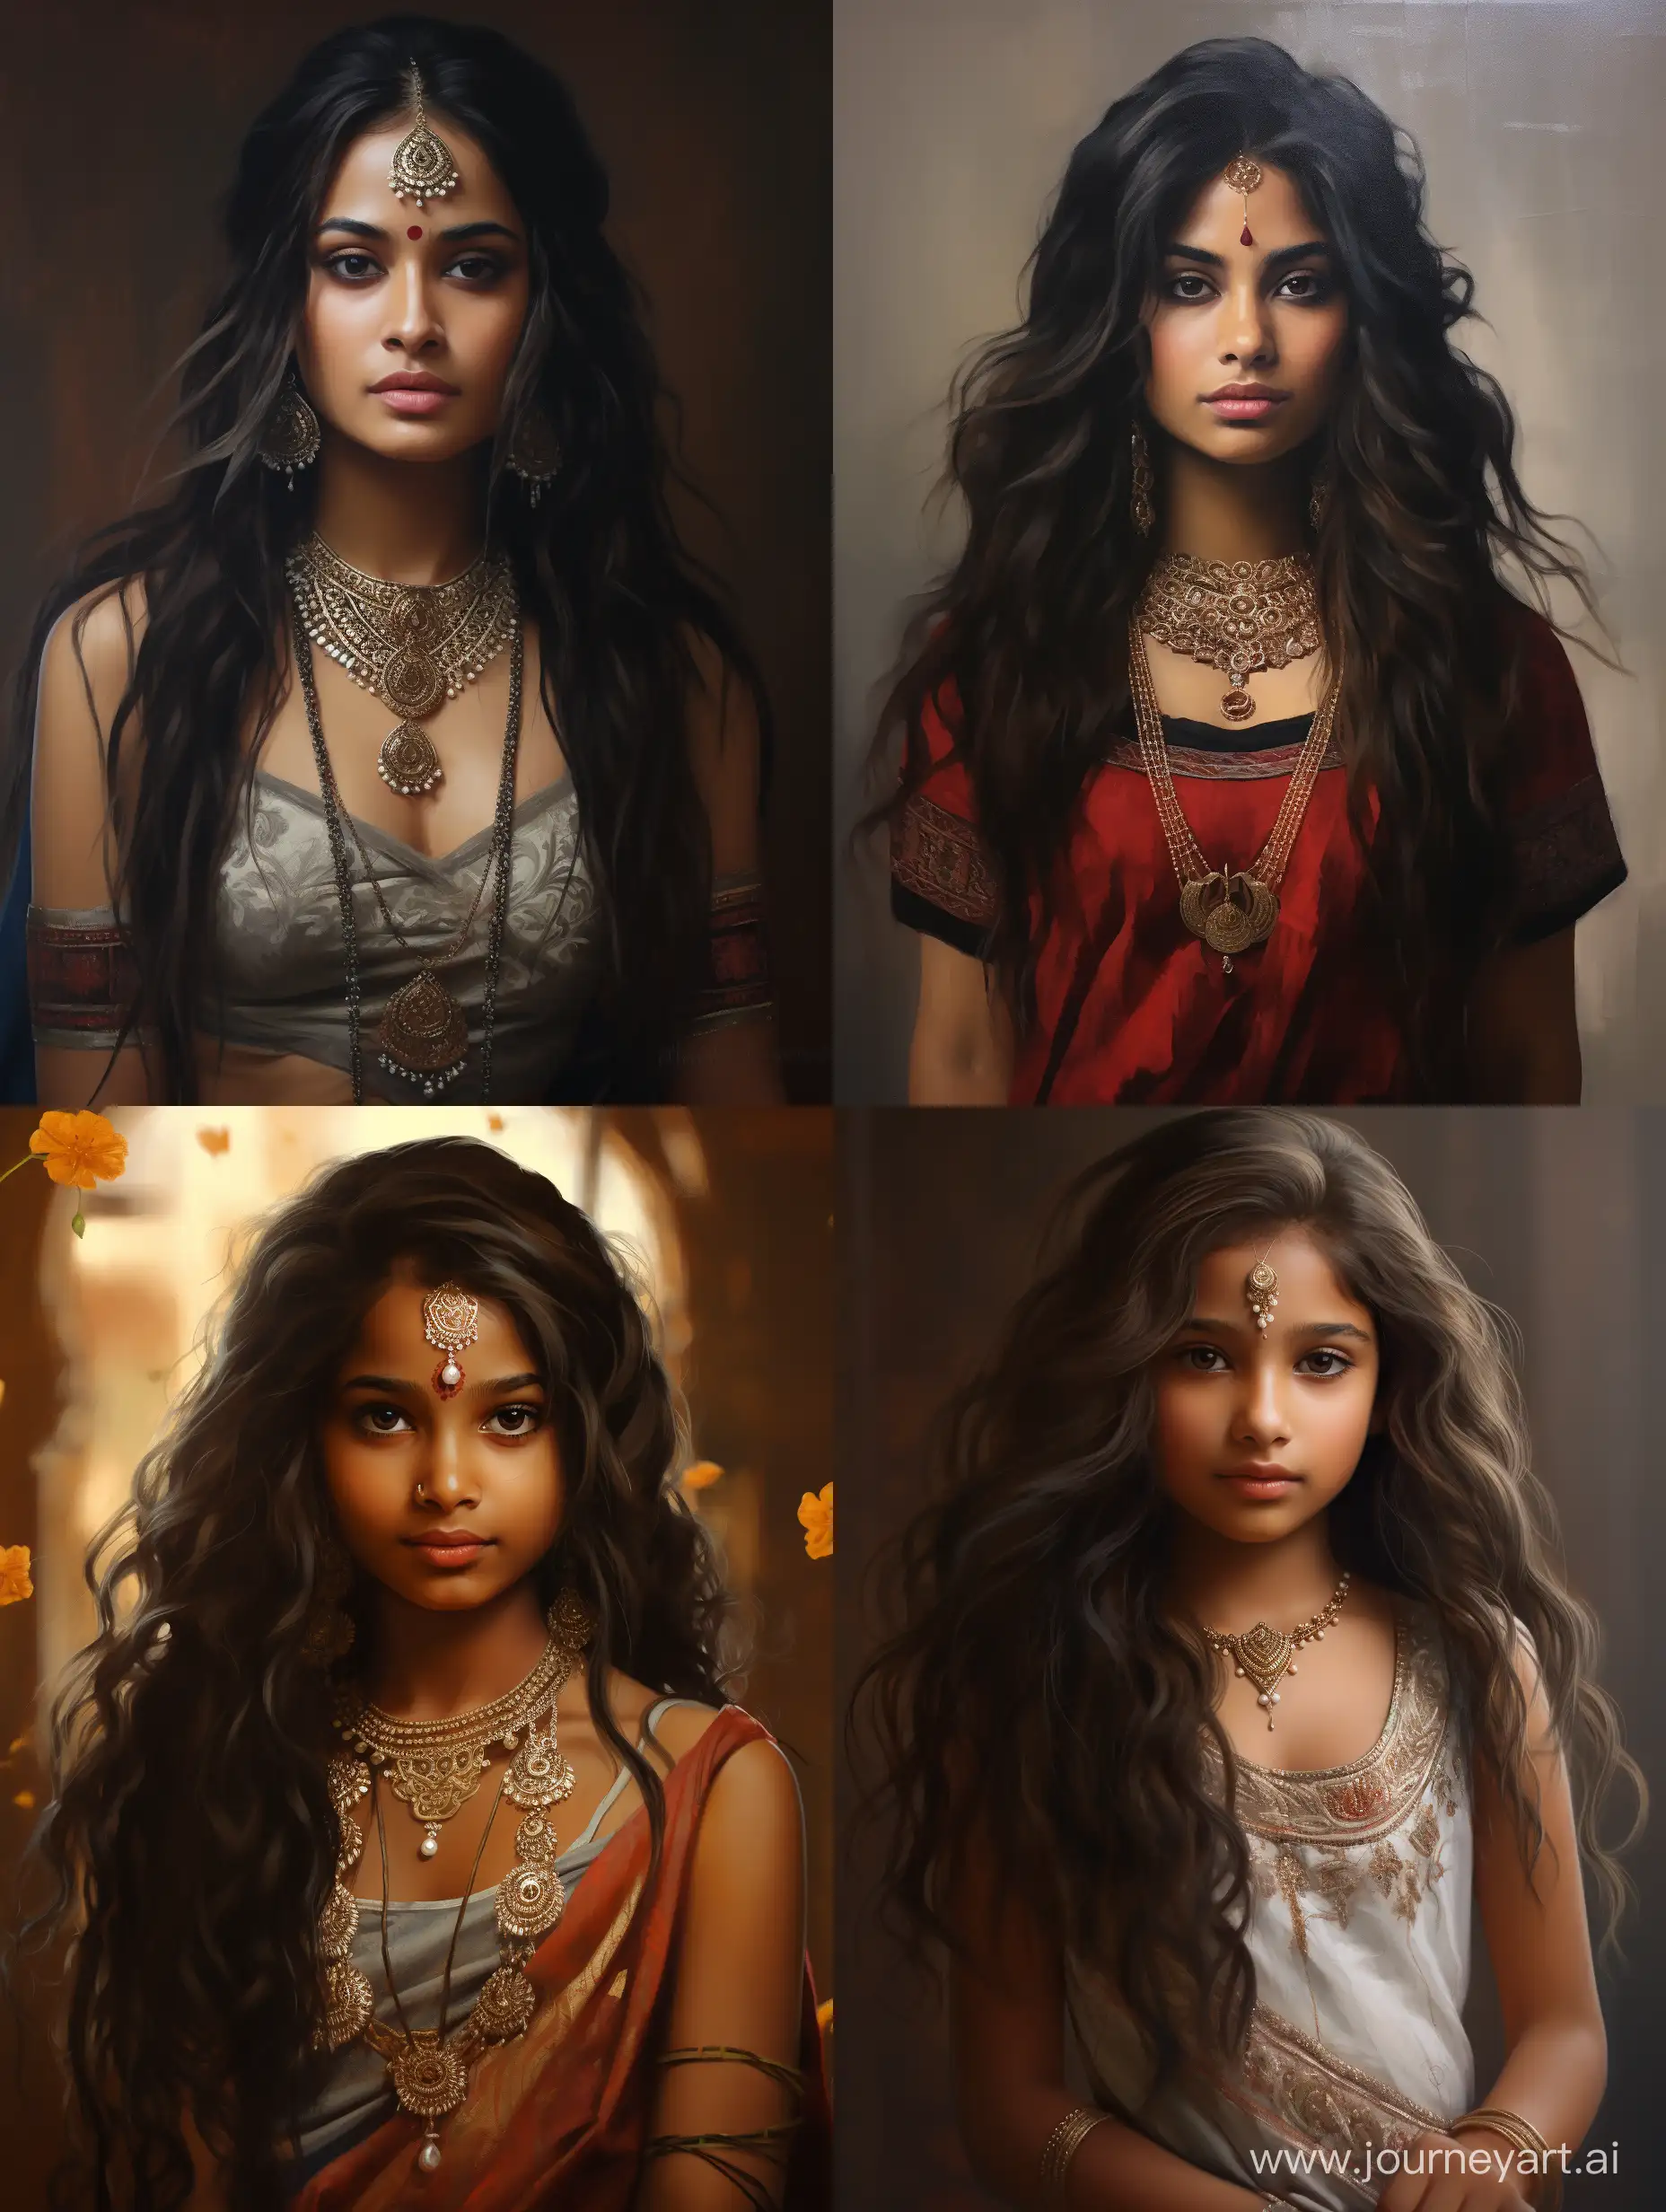 Charming-Indian-Girl-in-34-Aspect-Ratio-Captivating-Portrait